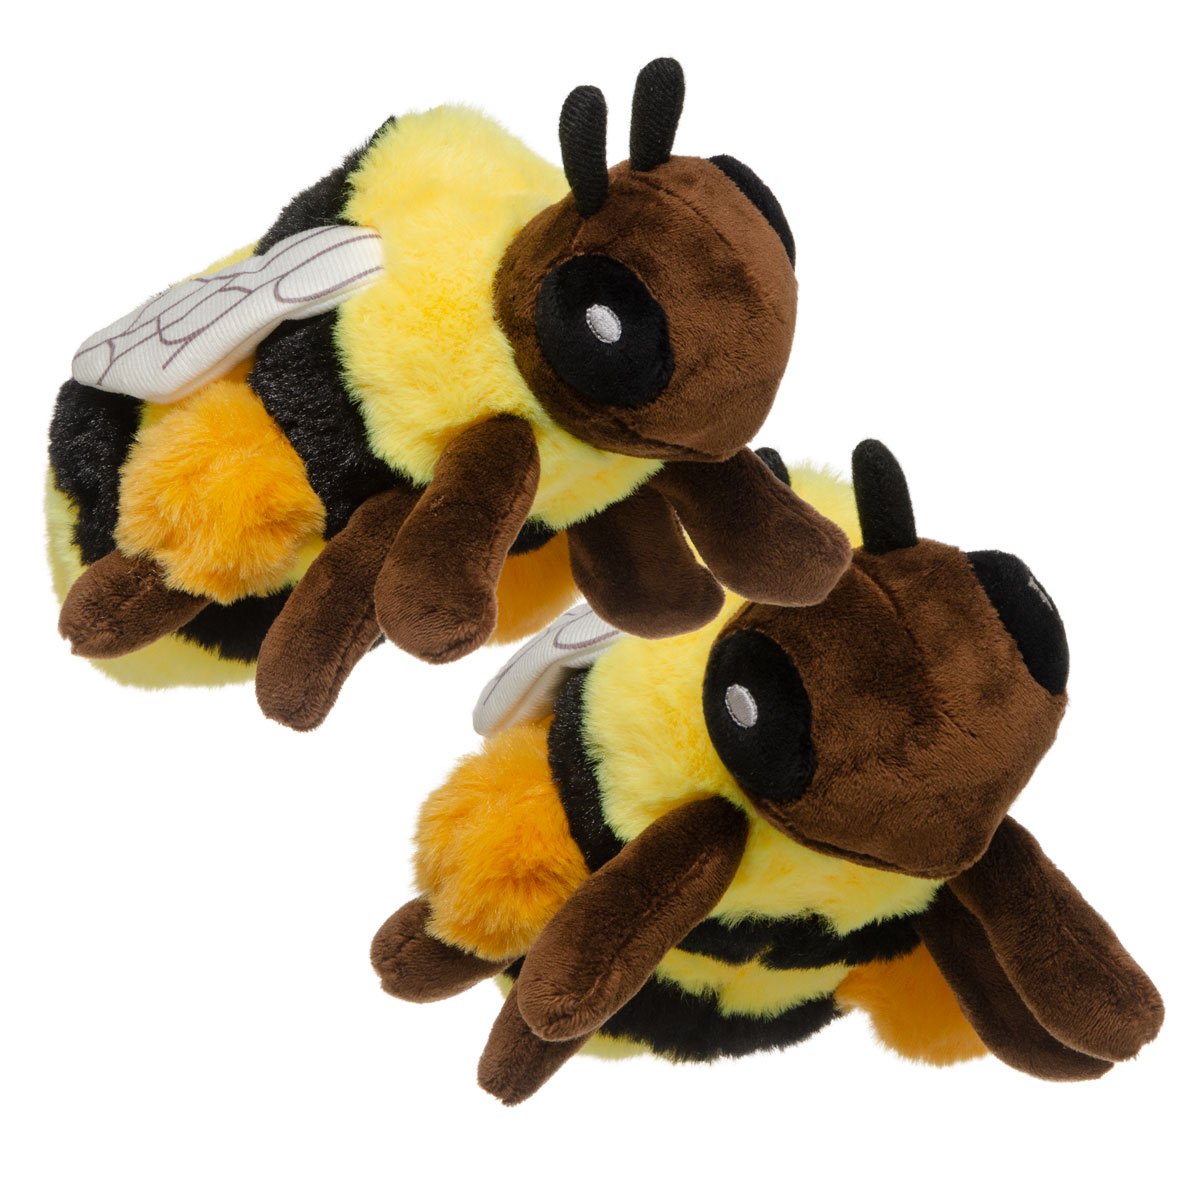 Adopt a Bee  Symbolic Adoptions from WWF